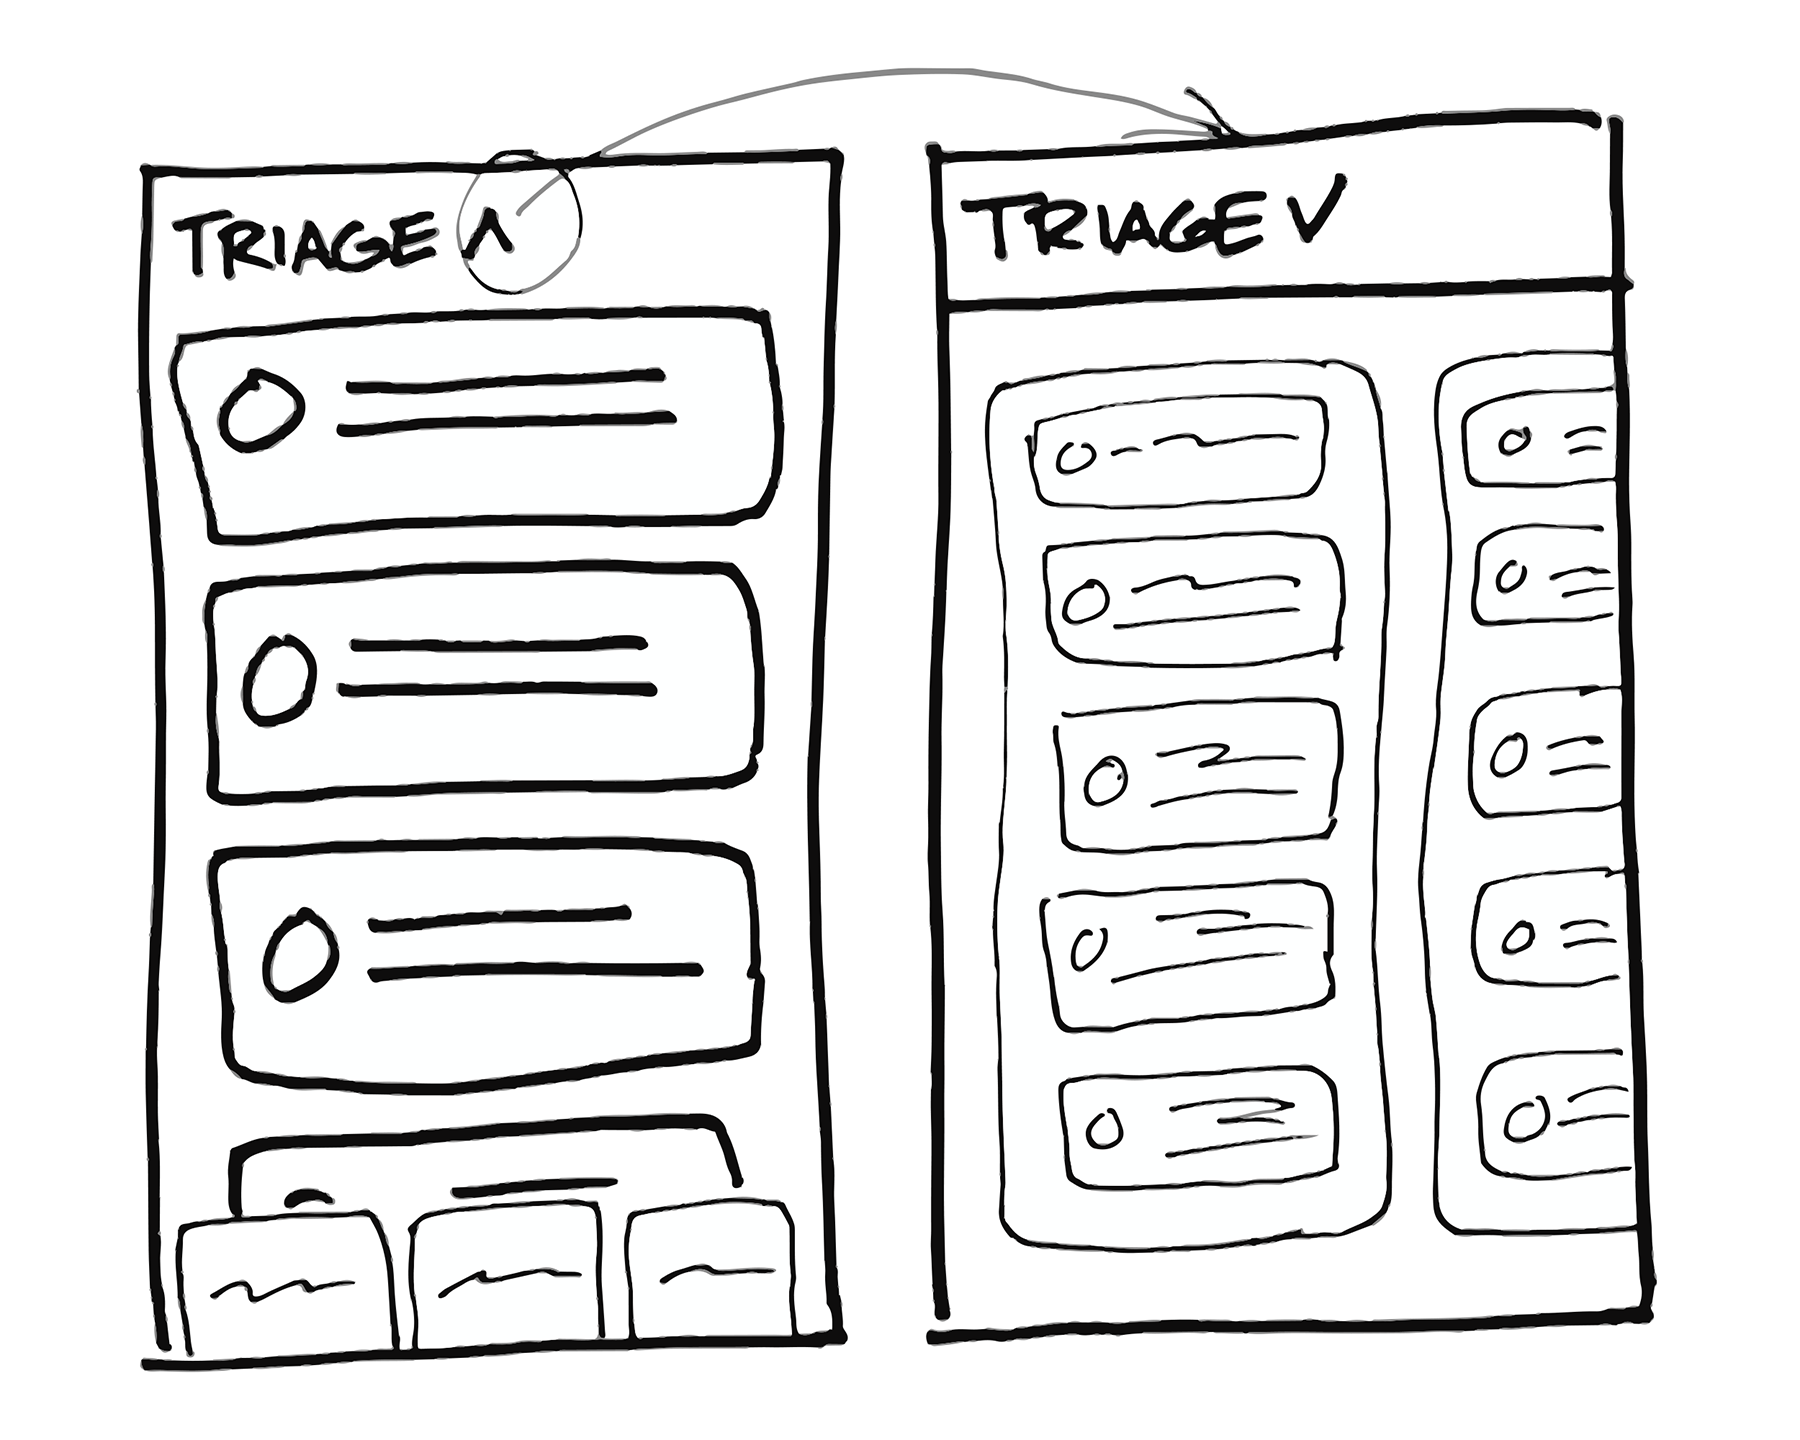 Sketch of the Triage toggle behavior